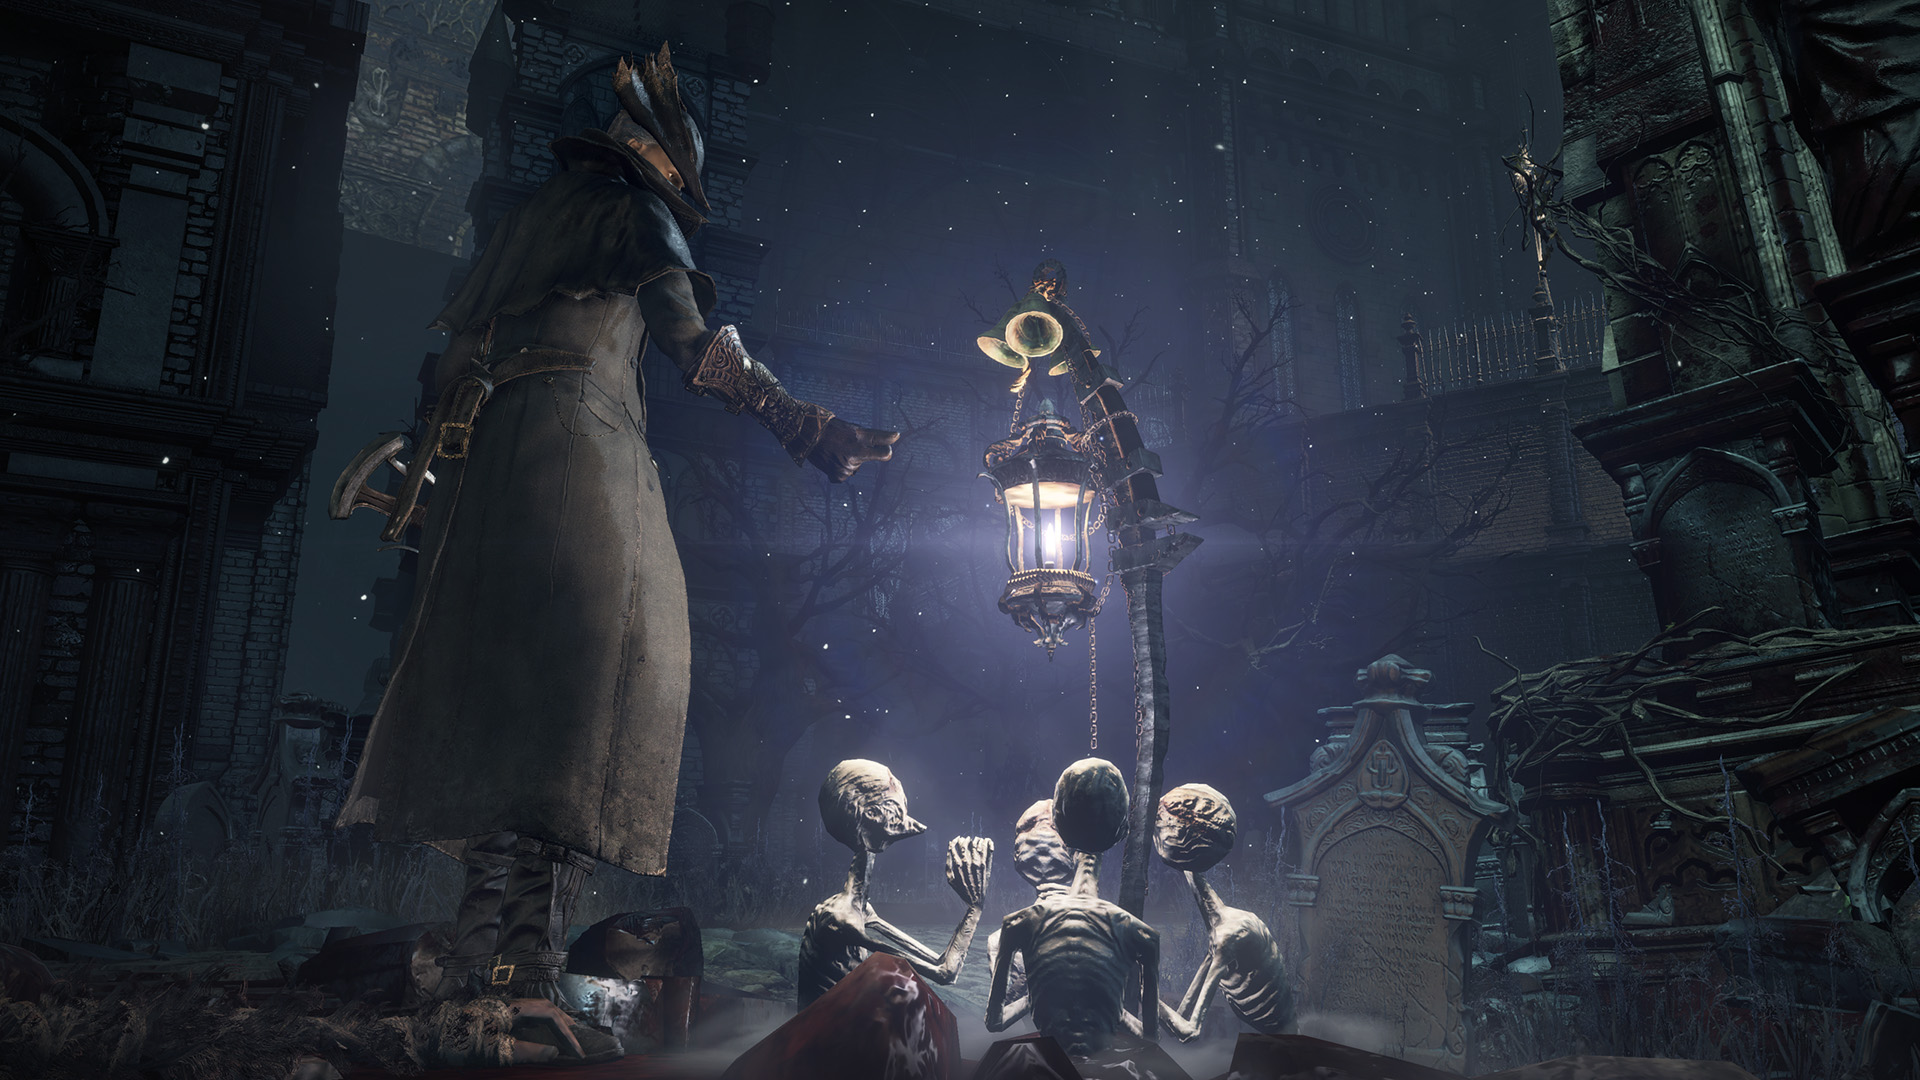 Heartwarming! So nice to see the citizens of Yharnam come together to  celebrate HRHs 70th jubilee! From   : r/bloodborne